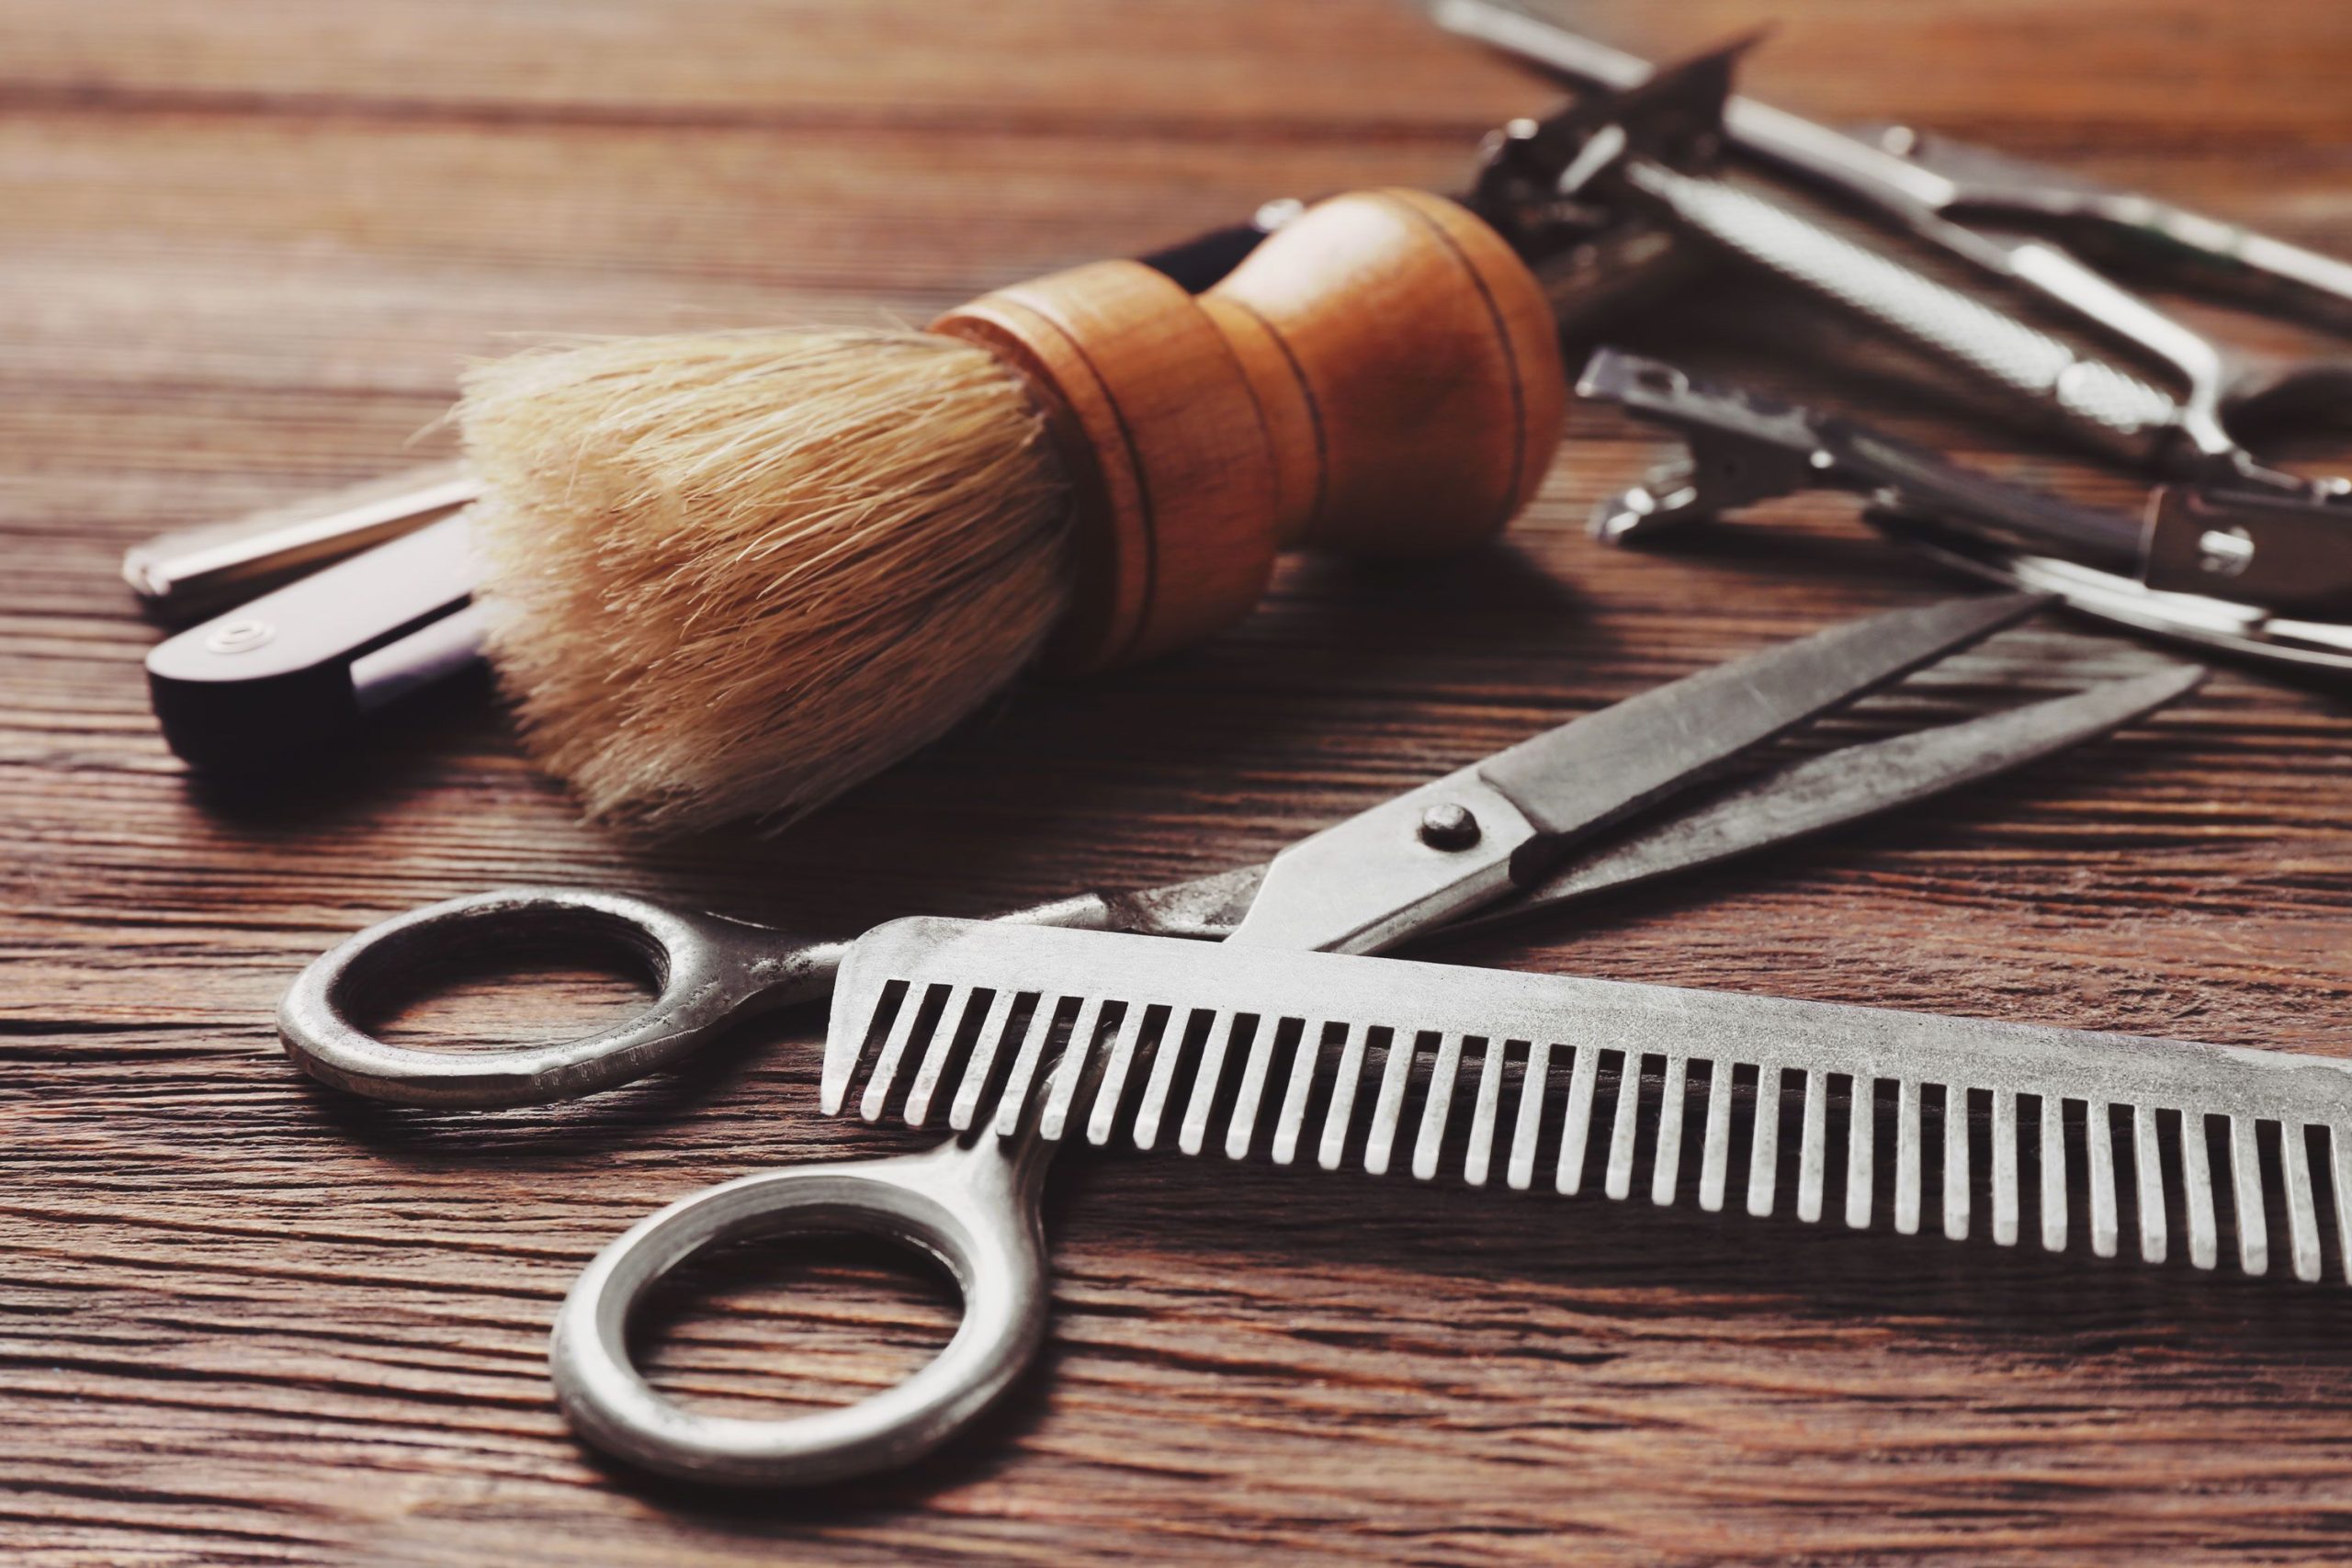 How To Be A Professional With Barber Shop Tools In 3 Days